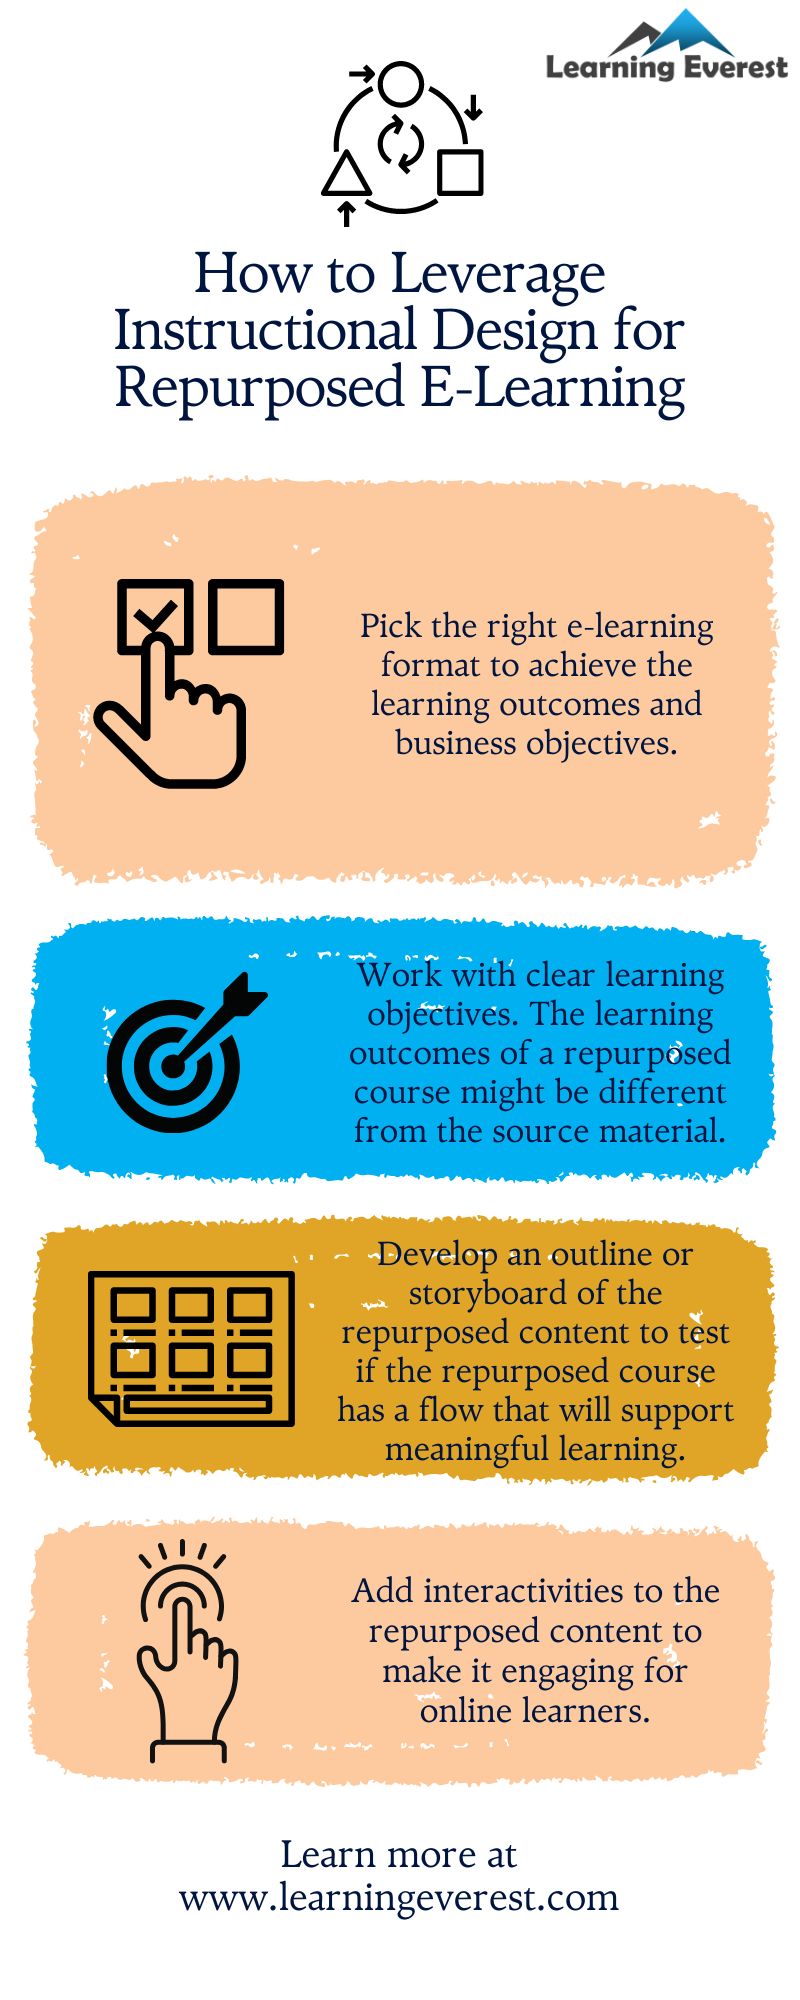 How to Leverage Instructional Design for Repurposed E-Learning Infographic